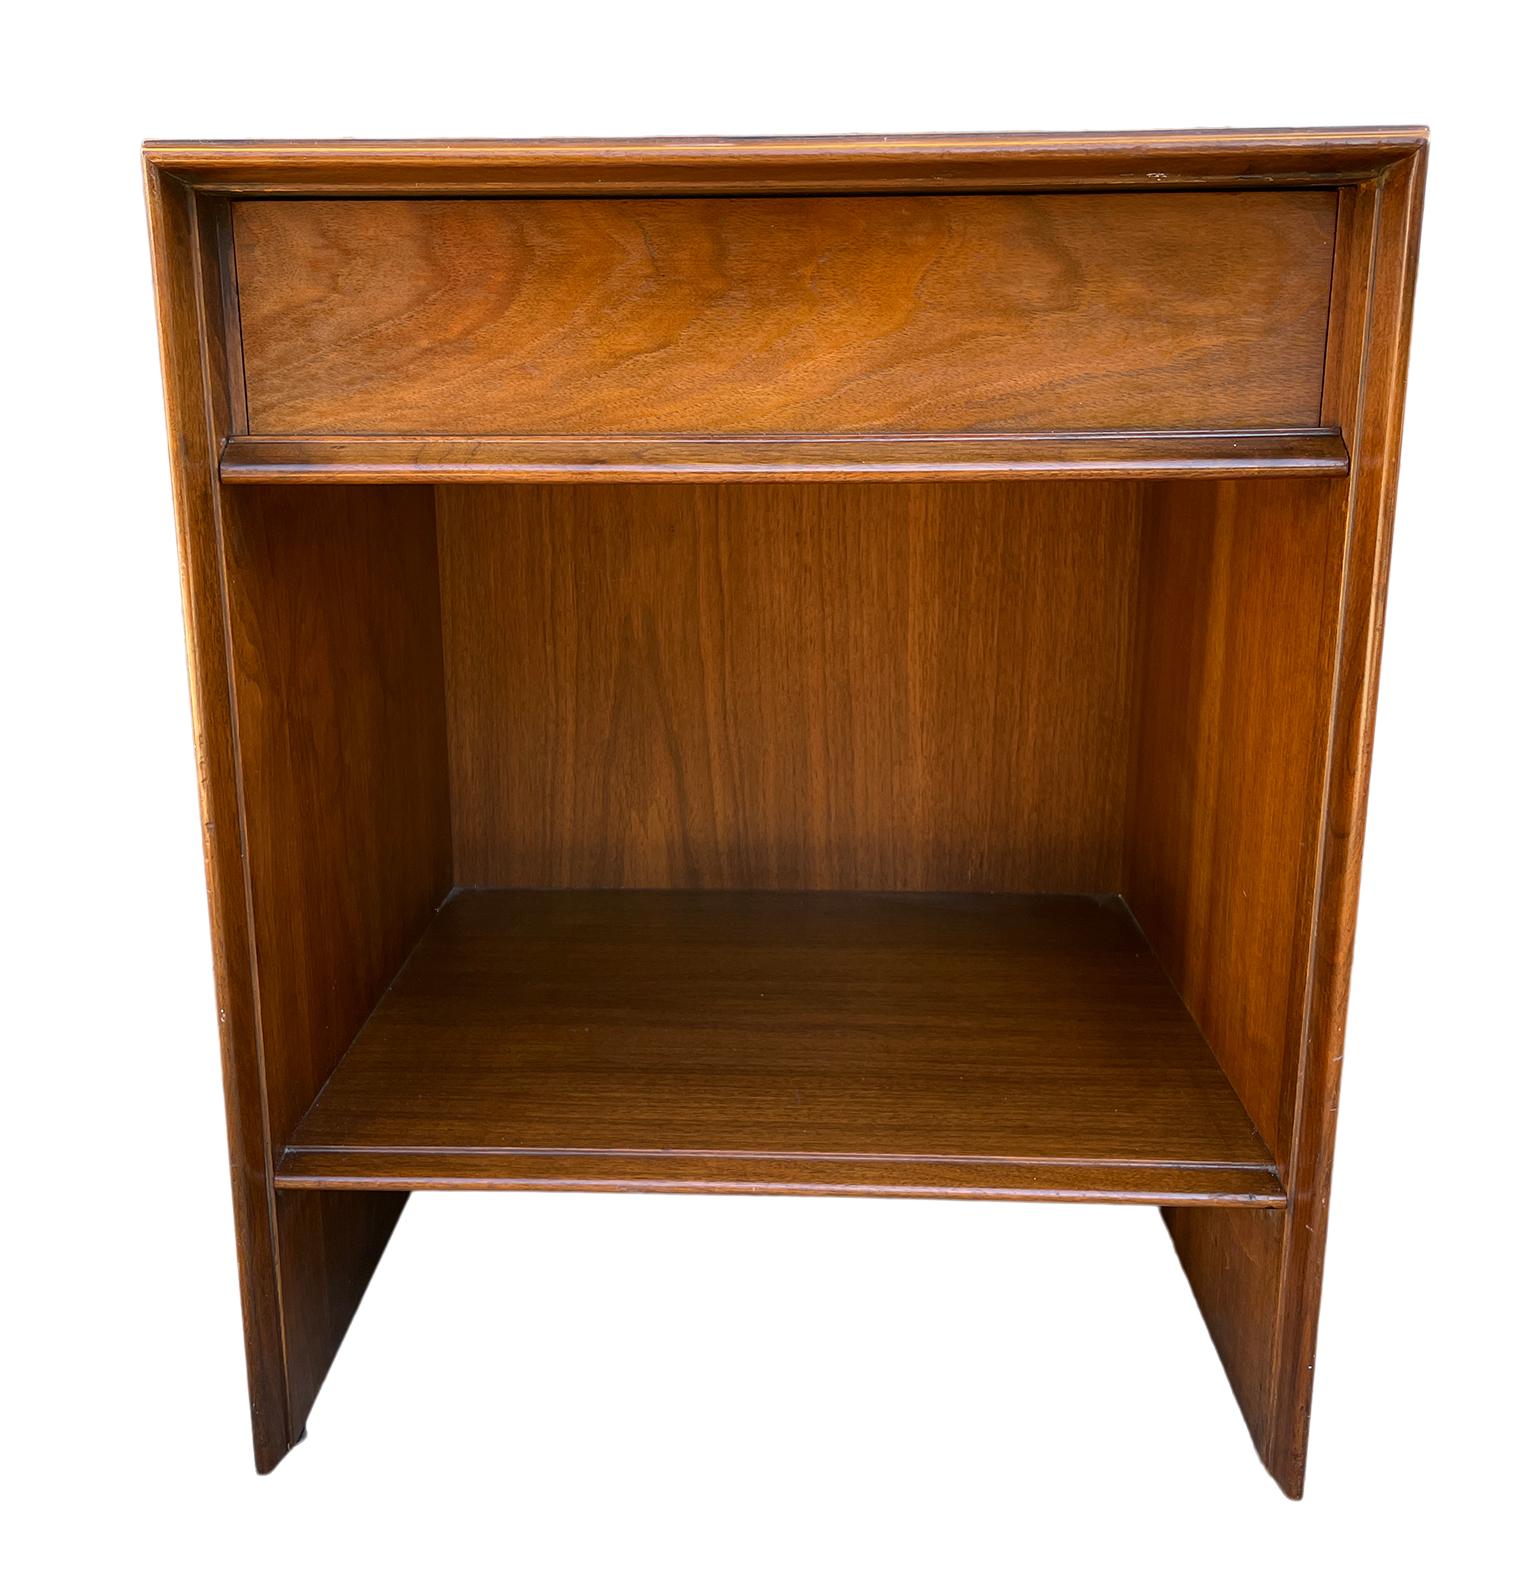 Single Drawer Walnut Nightstand by T.H. Robsjohn-Gibbings for Widdicomb In Good Condition For Sale In BROOKLYN, NY